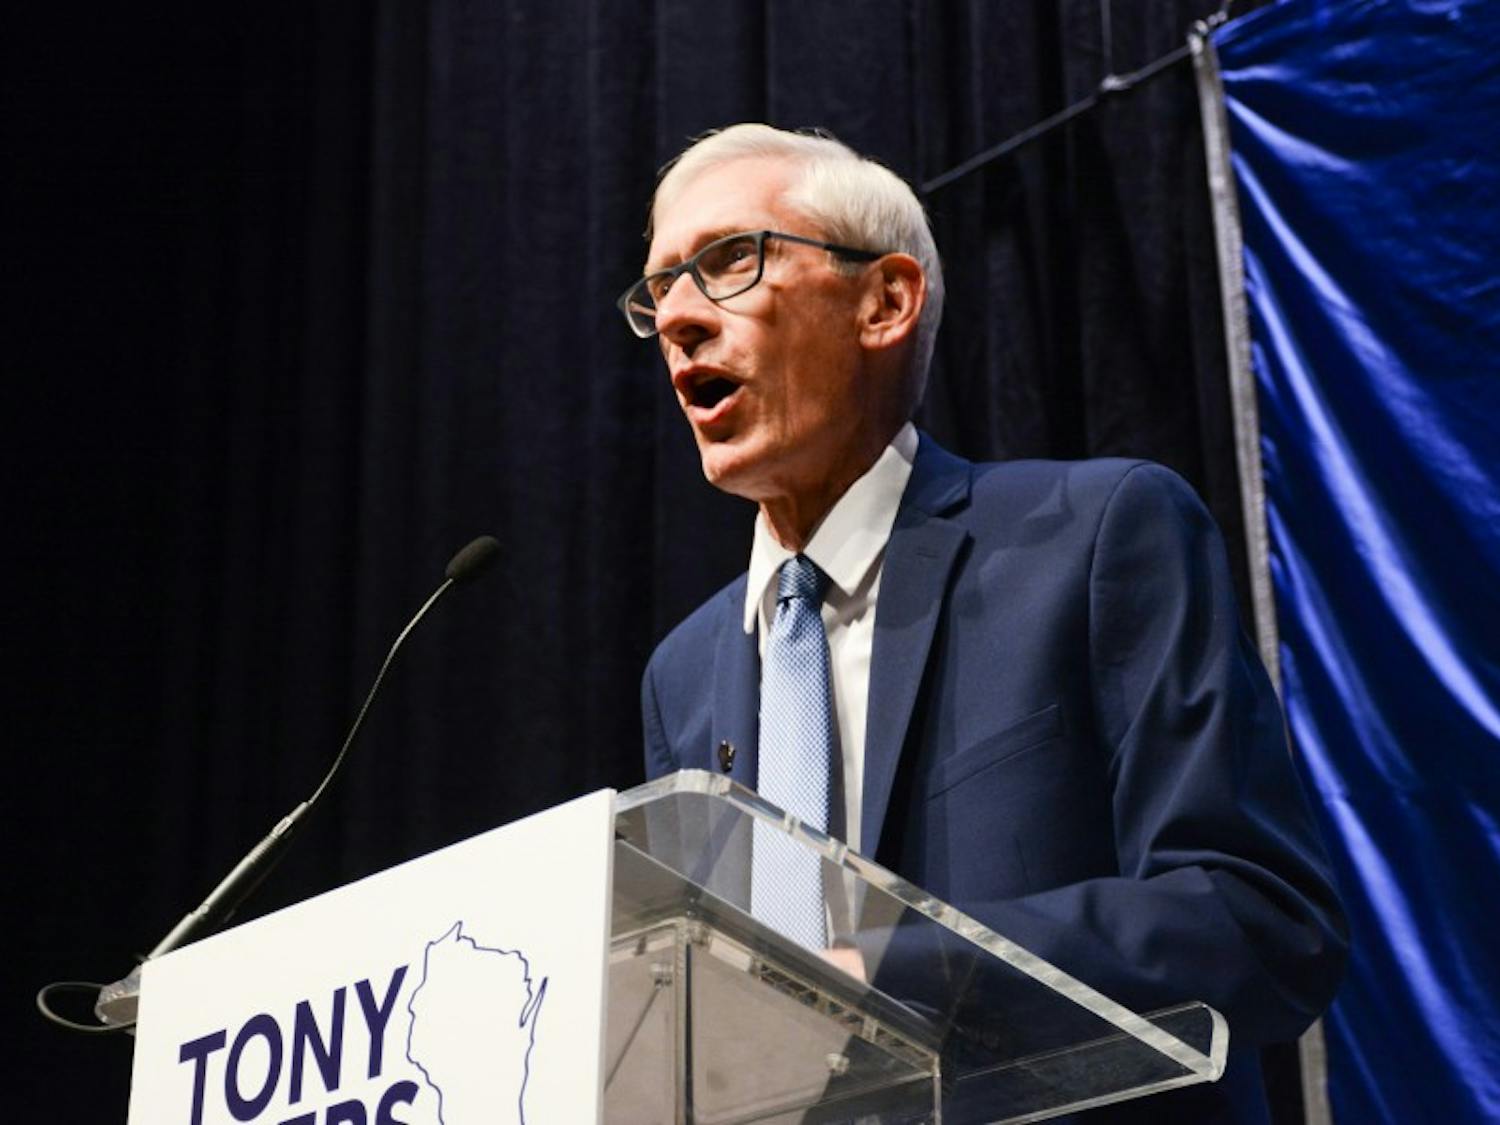 State Superintendent Tony Evers wins in the closest governor election Wisconsin has seen in over 50 years.